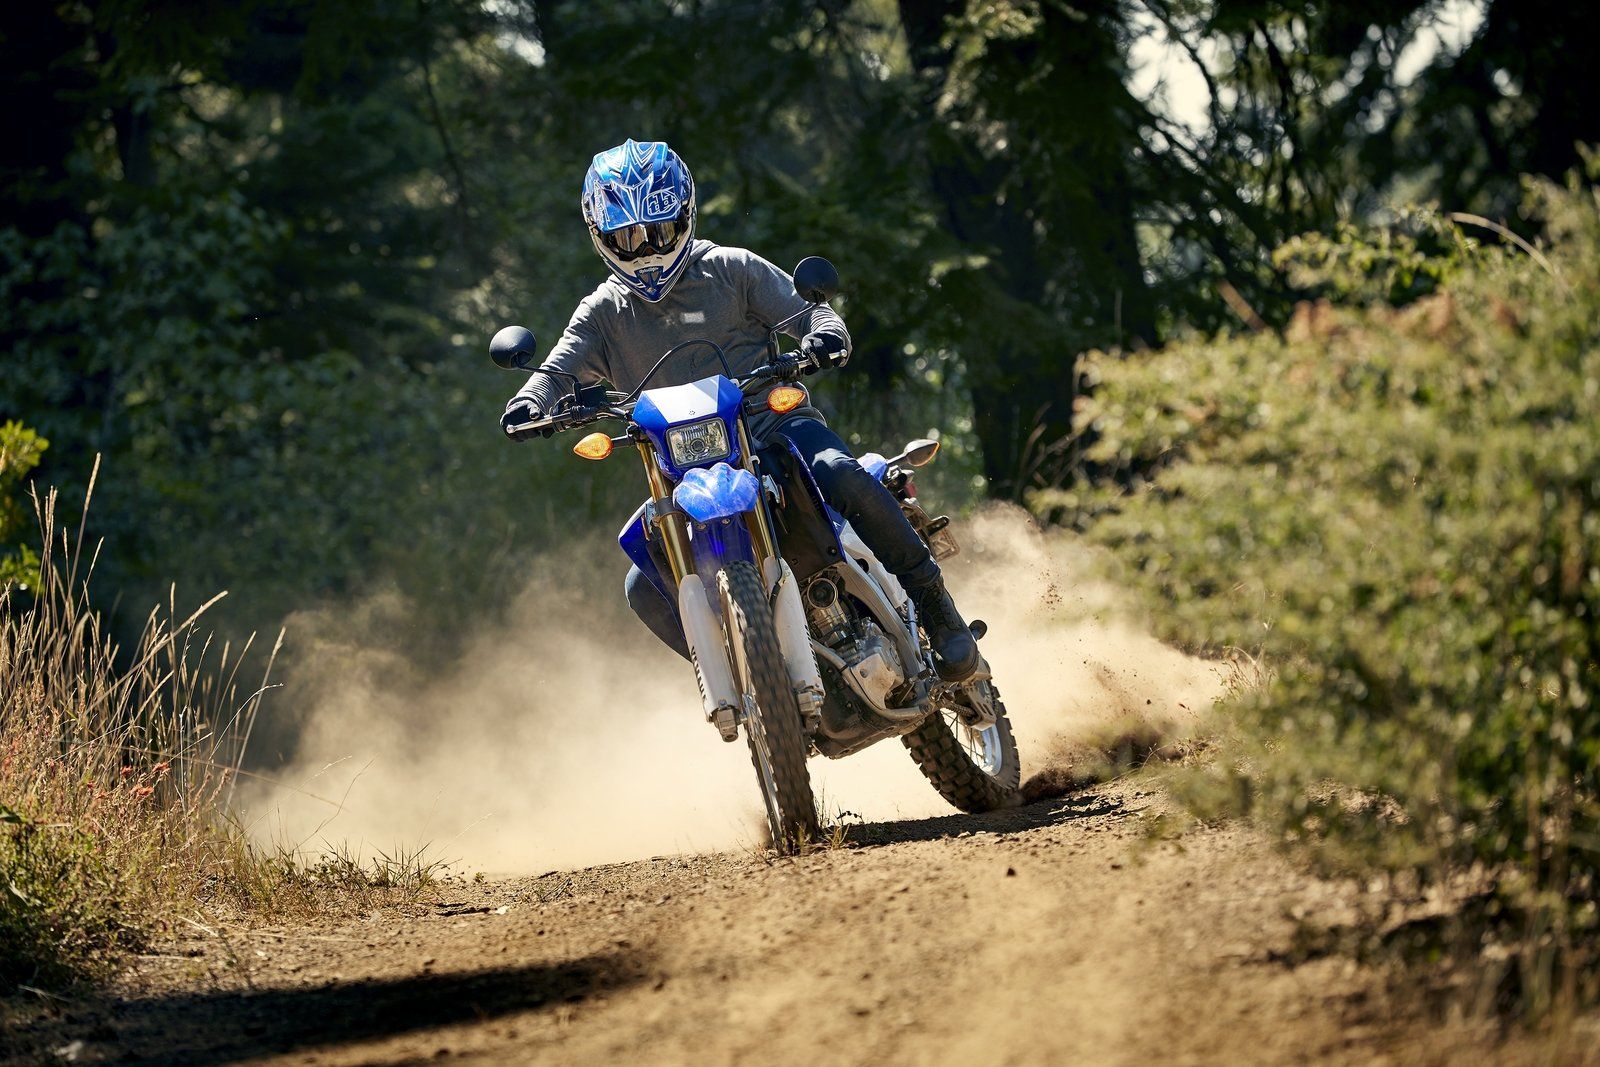 2020 Yamaha WR250R Picture, Photo, Wallpaper And Video